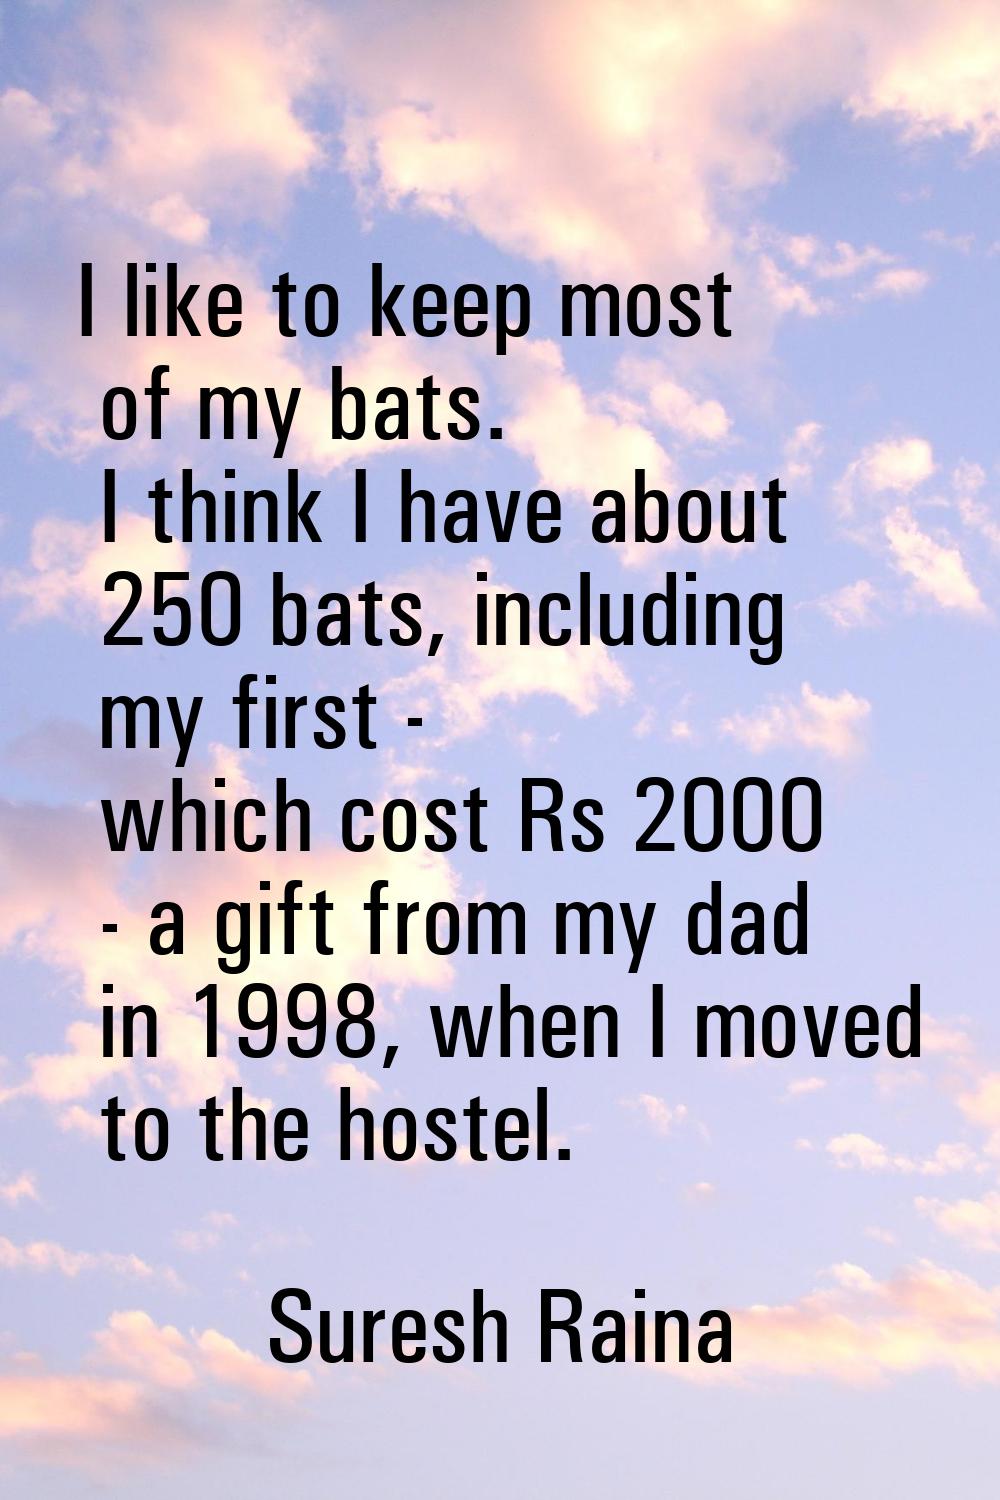 I like to keep most of my bats. I think I have about 250 bats, including my first - which cost Rs 2